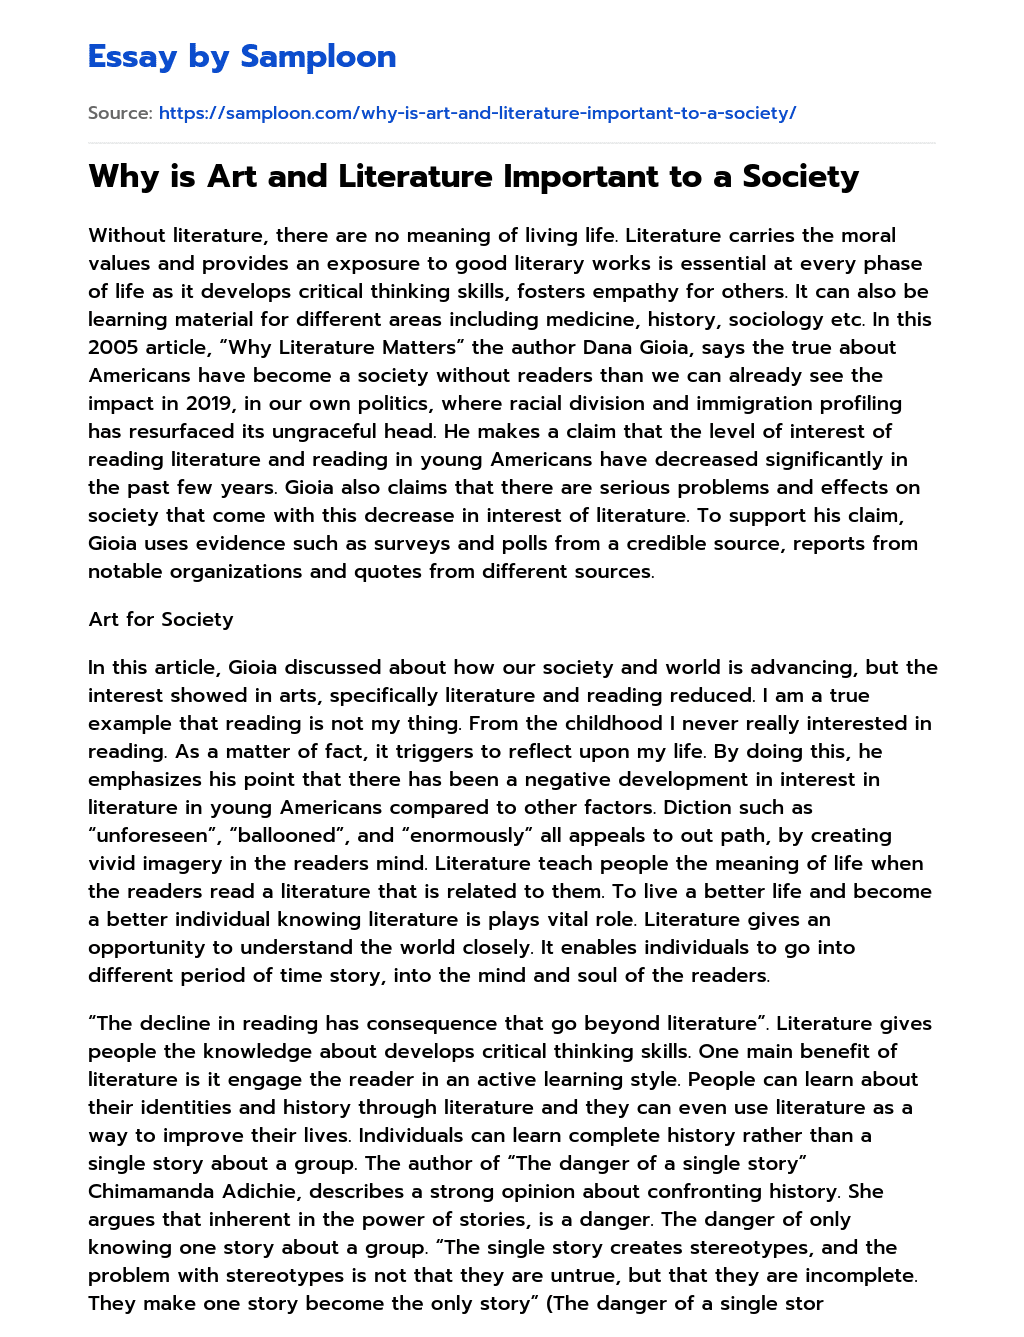 essay about art and literature